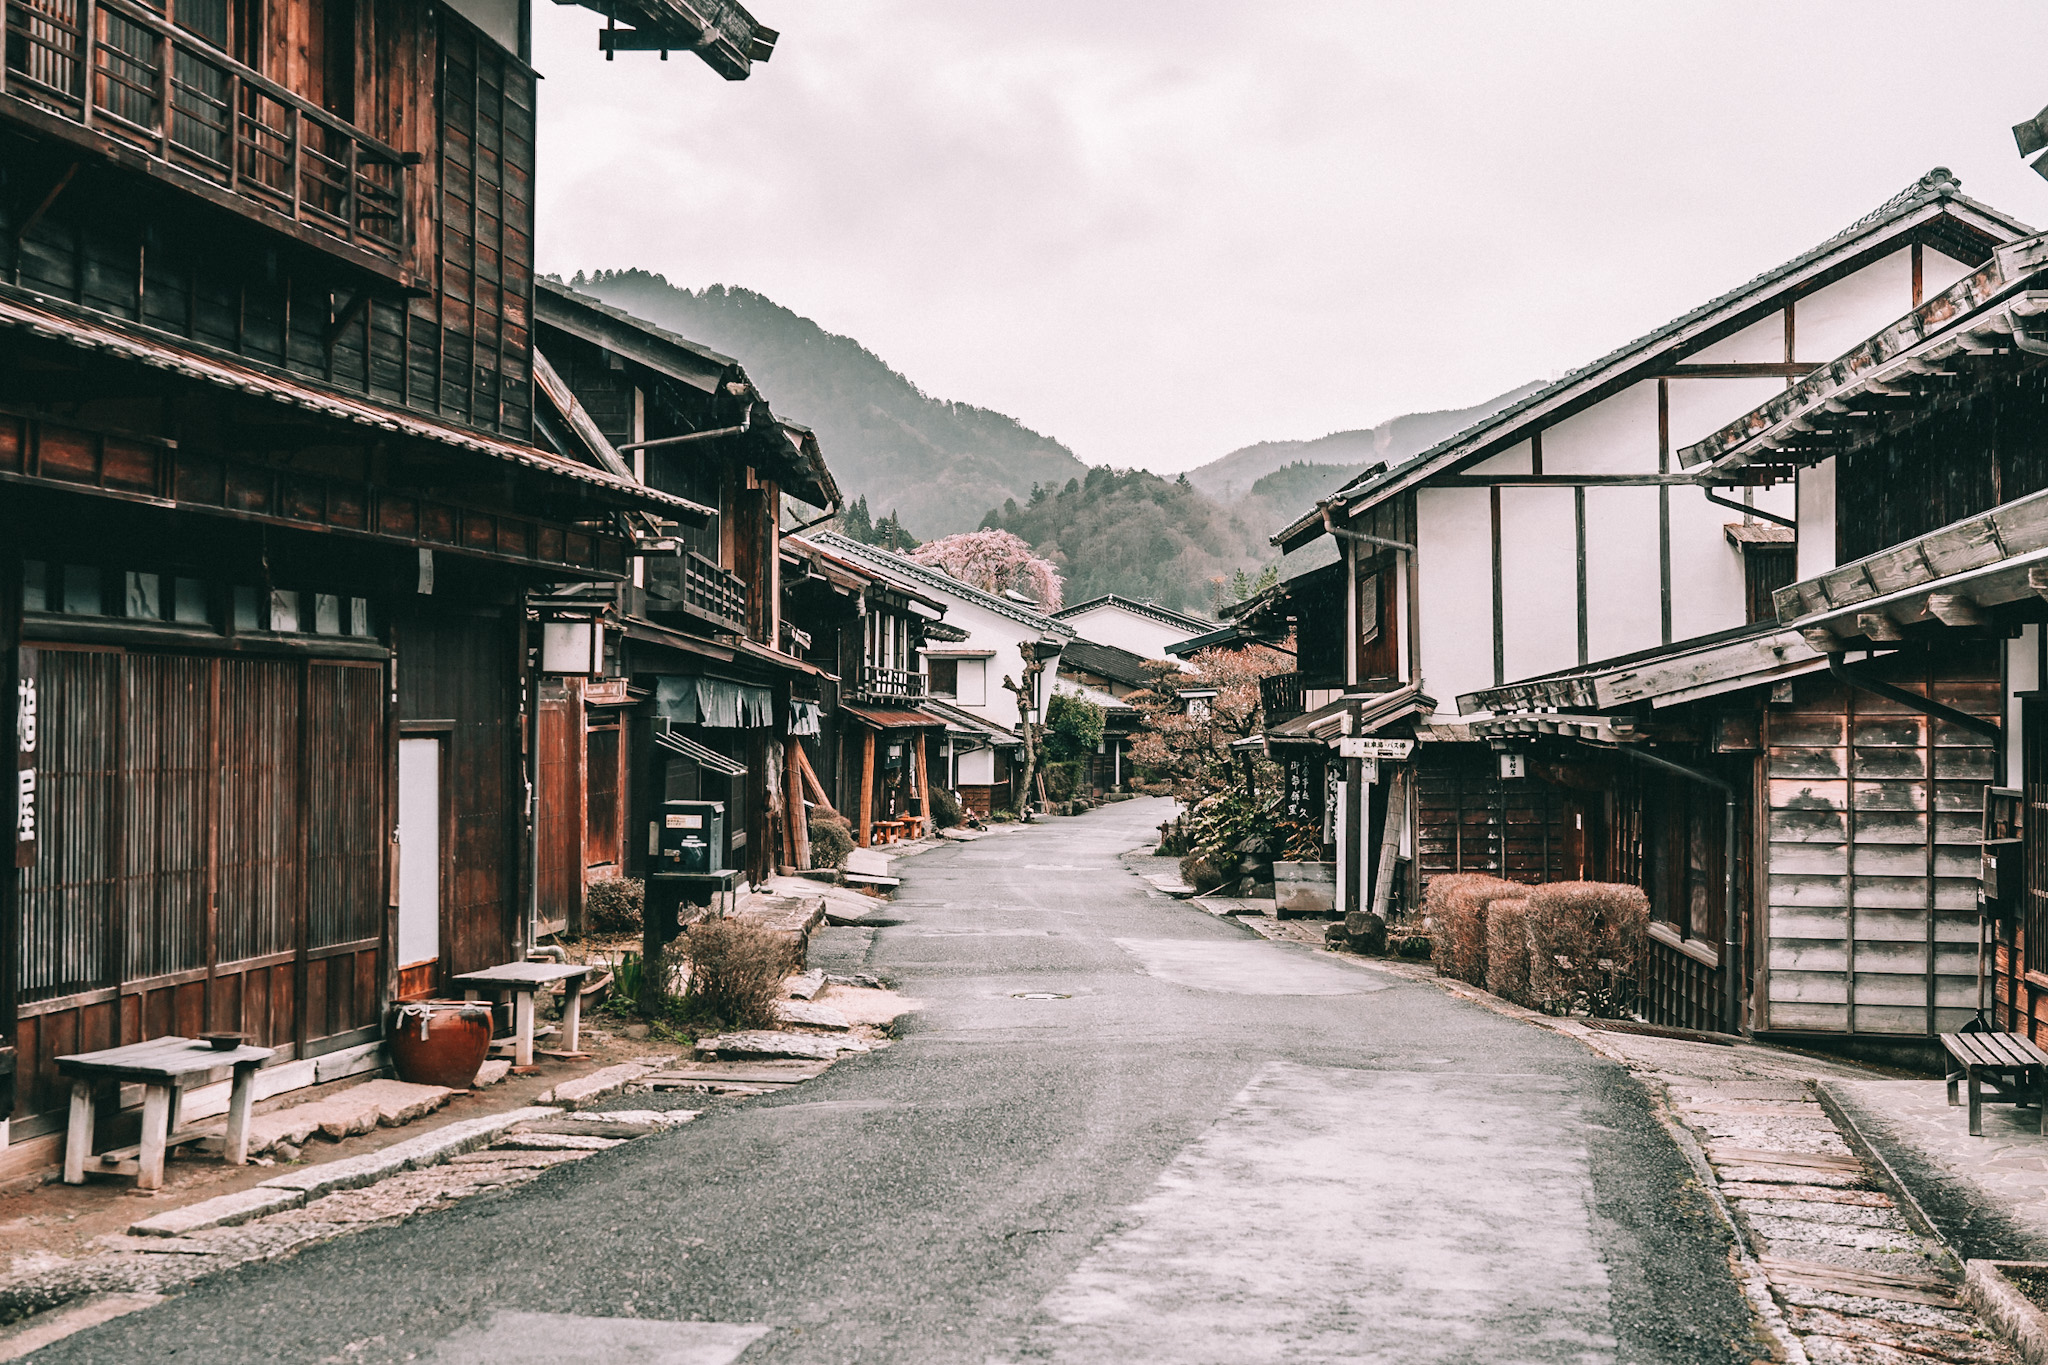 Tsumago, Japan ancient hike by Annie Miller